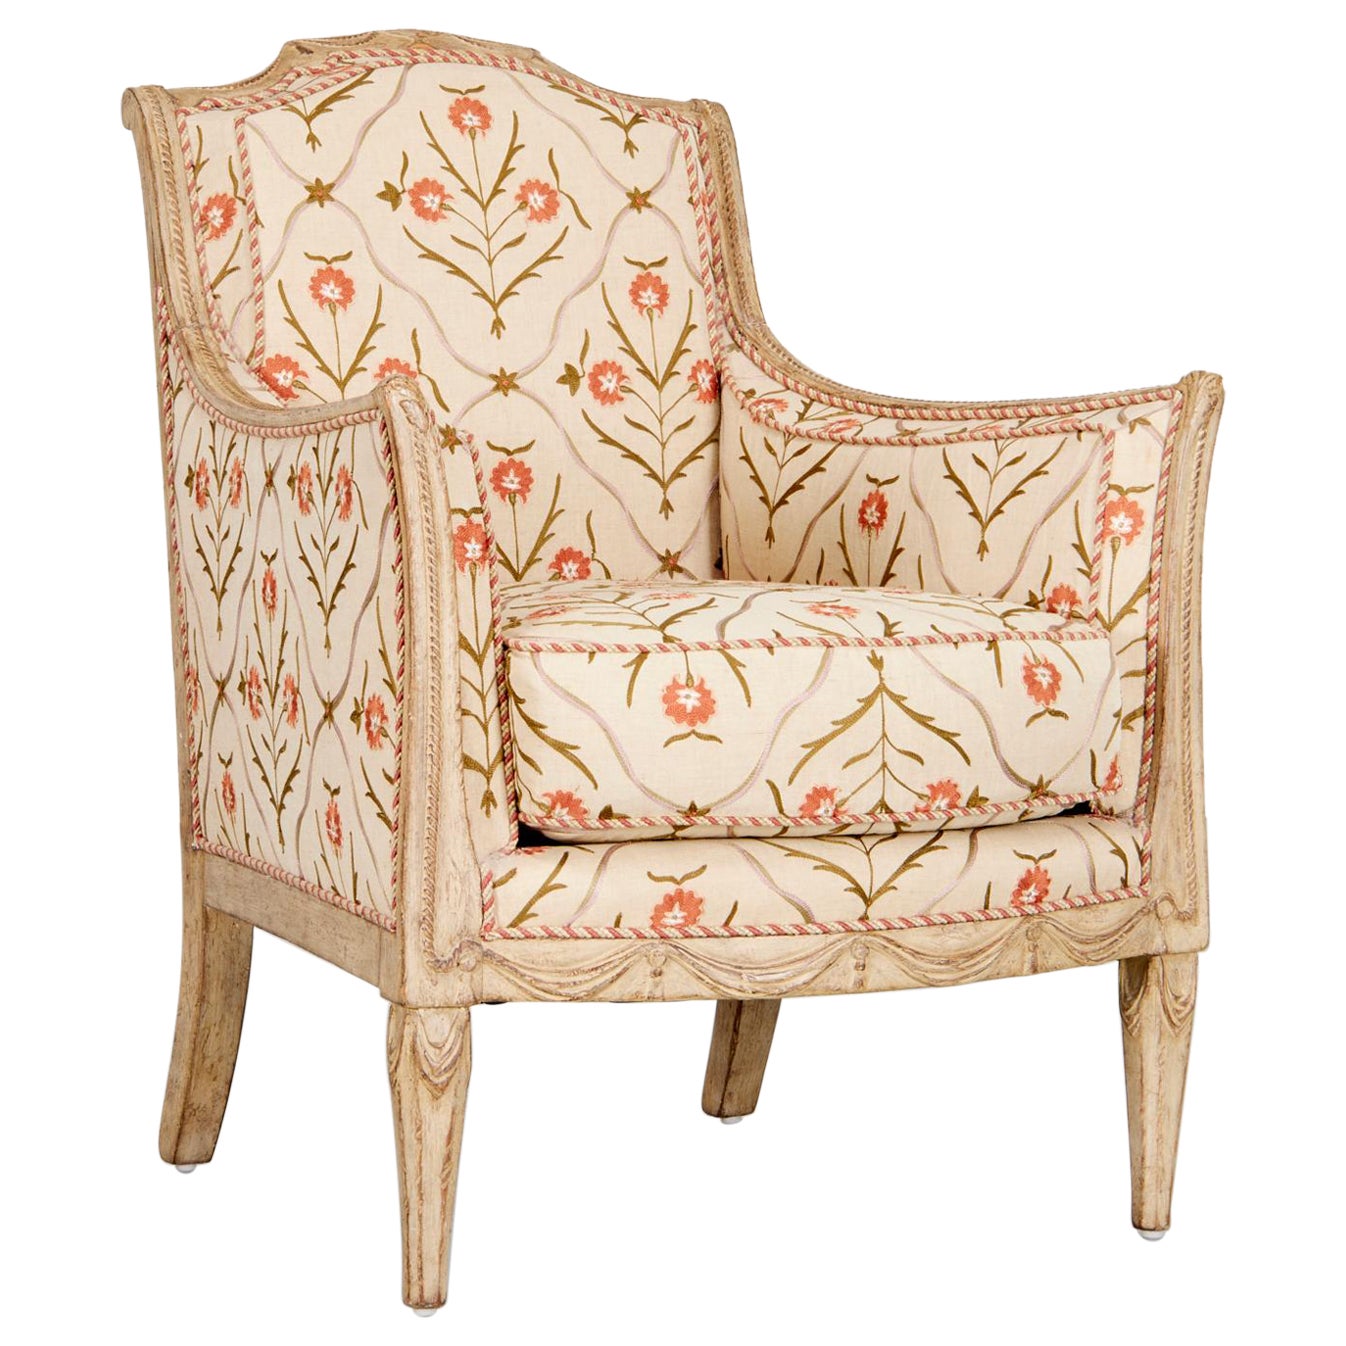 20th C. Directoire Style Painted and Floral Crewelwork Upholstered Bregere For Sale